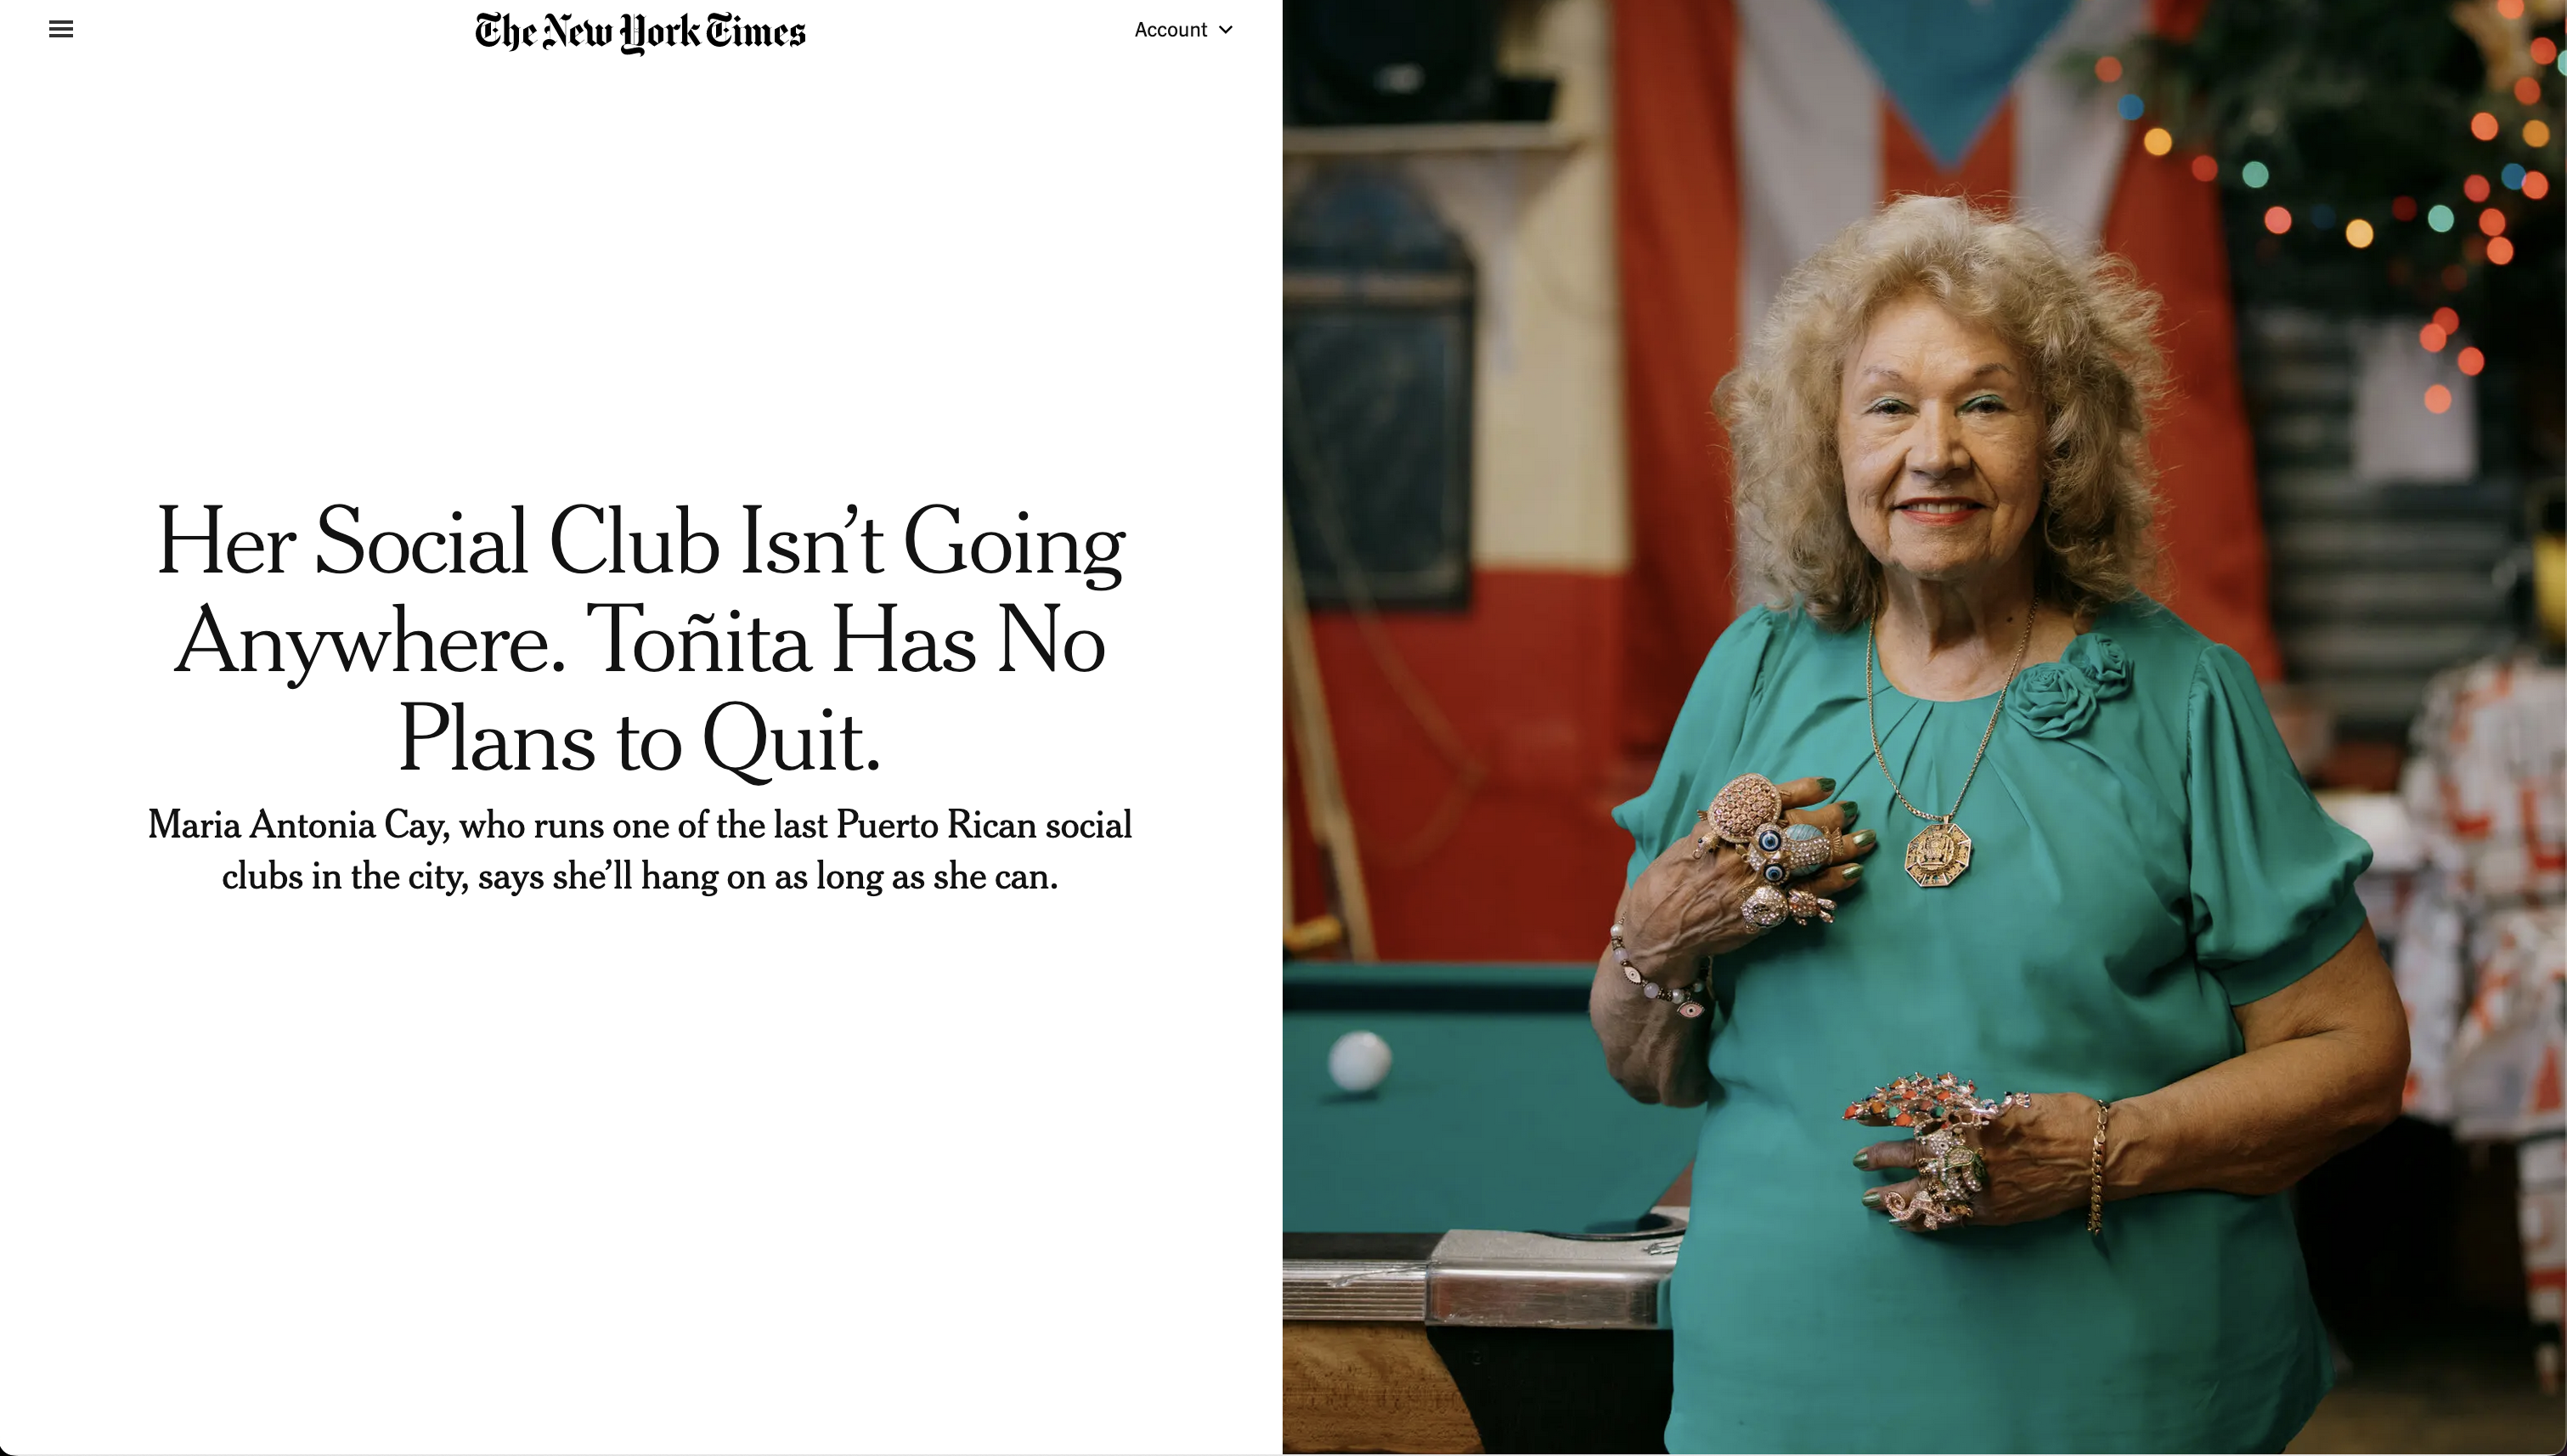 for The New York Times: Her Social Club Isn’t Going Anywhere. Toñita Has No Plans to Quit.